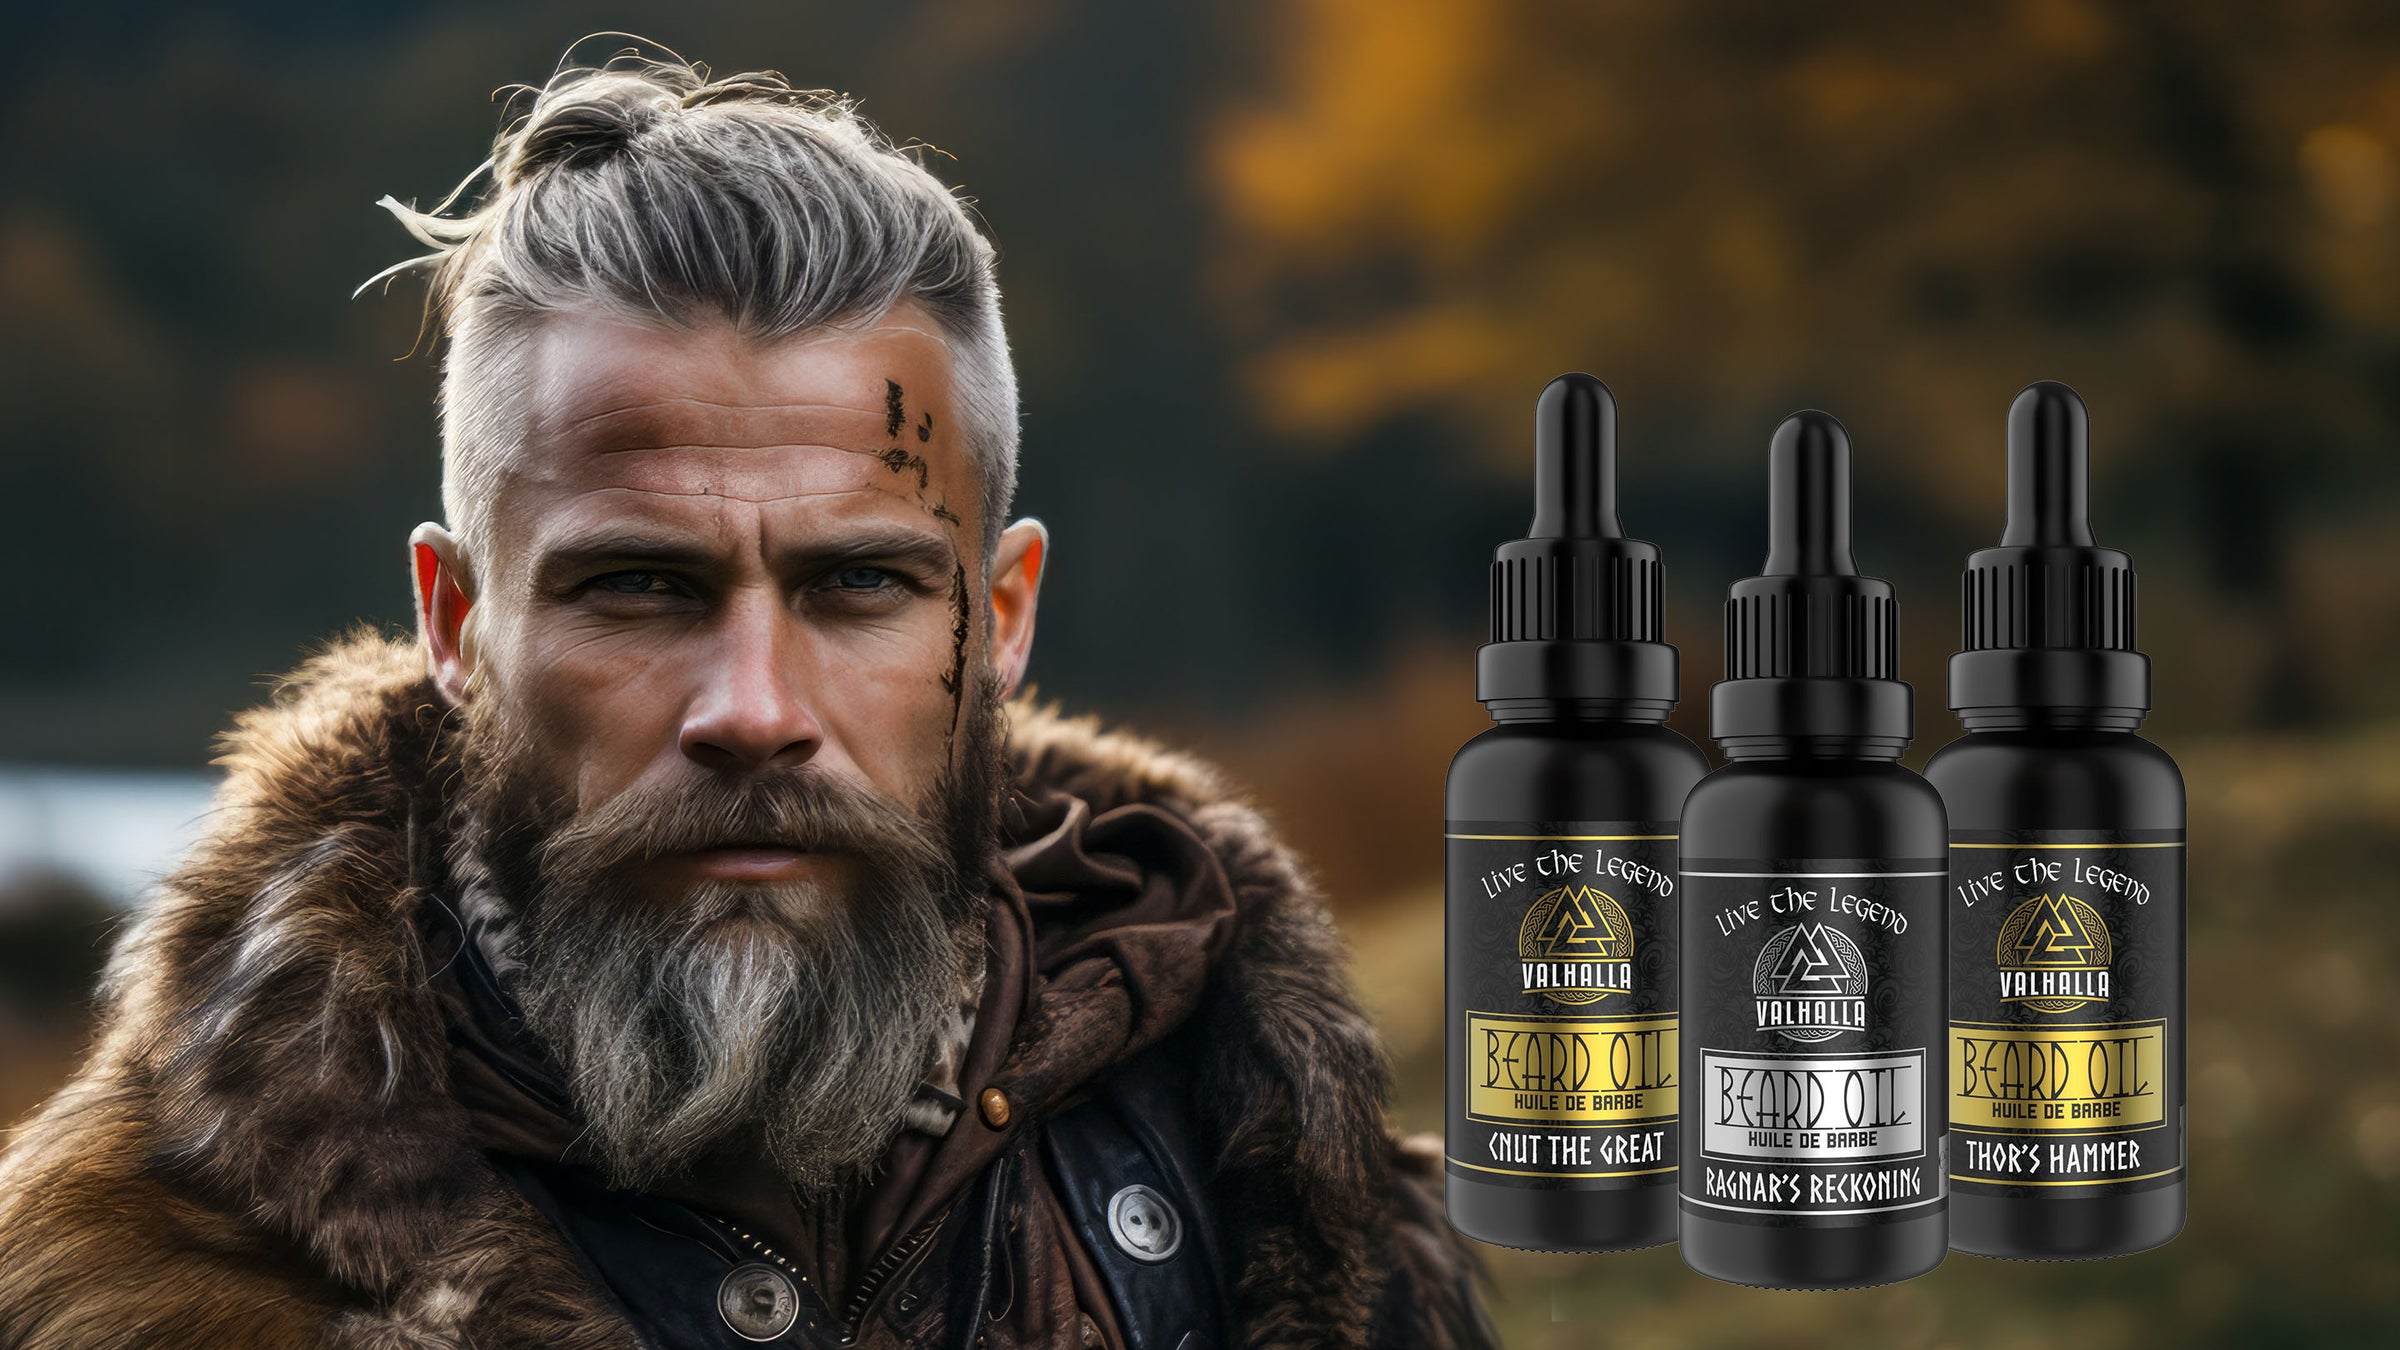 Modern Viking Man with a trendy hair cut and three beard oils off to the side